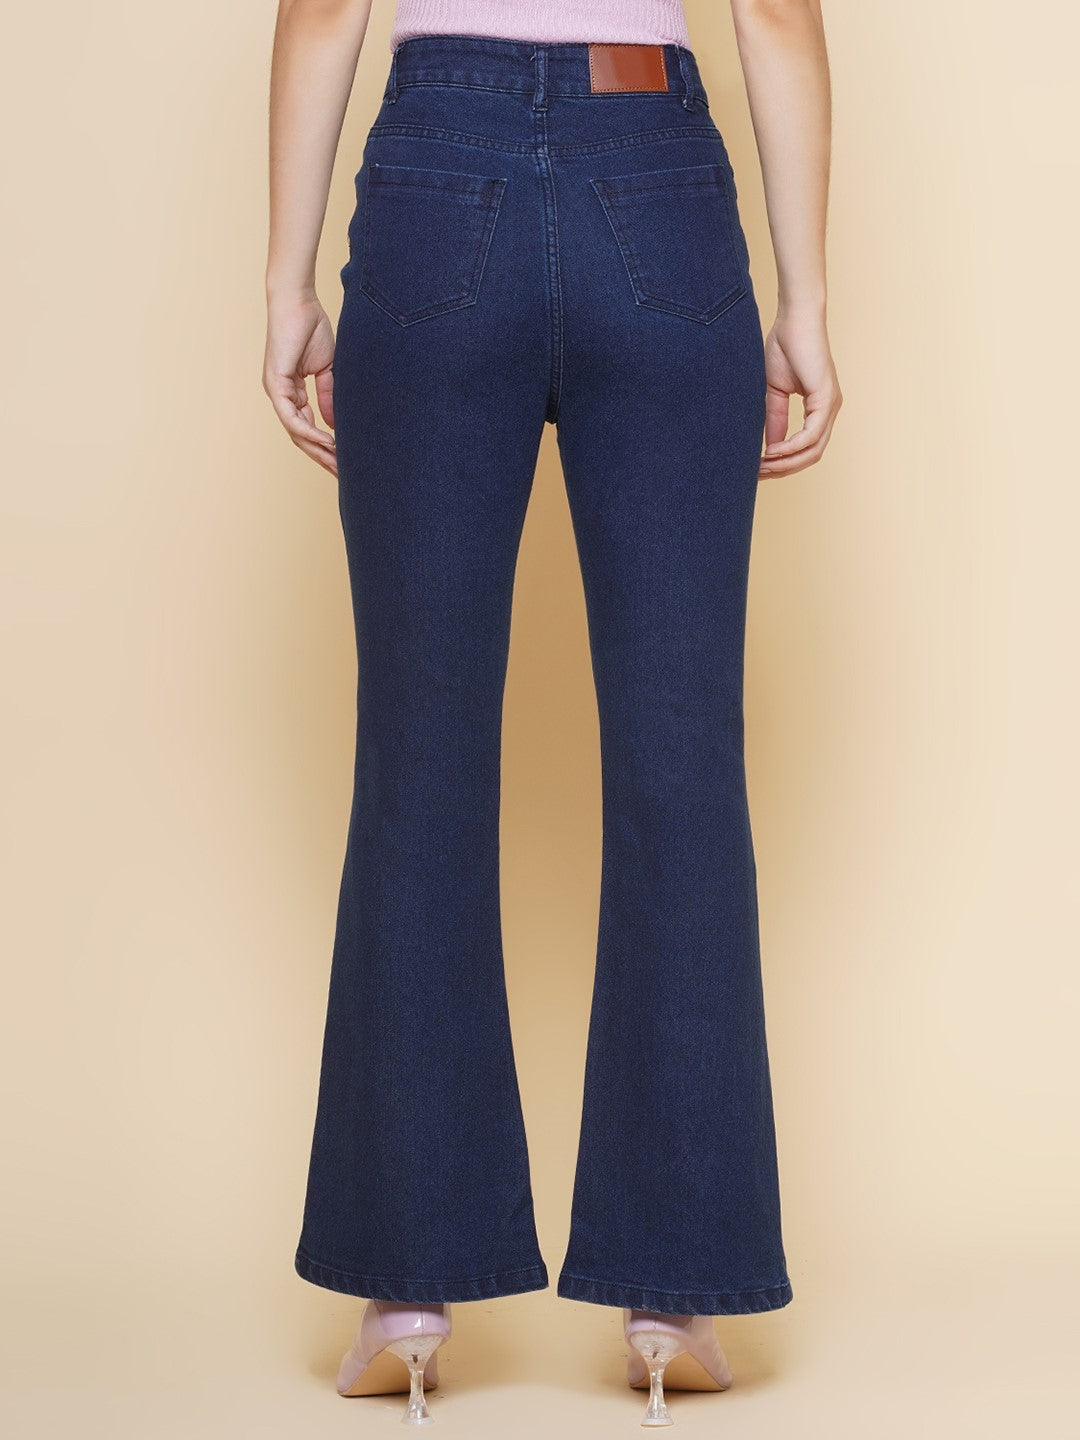 Boot Cut Blue High Rise Jeans For Women